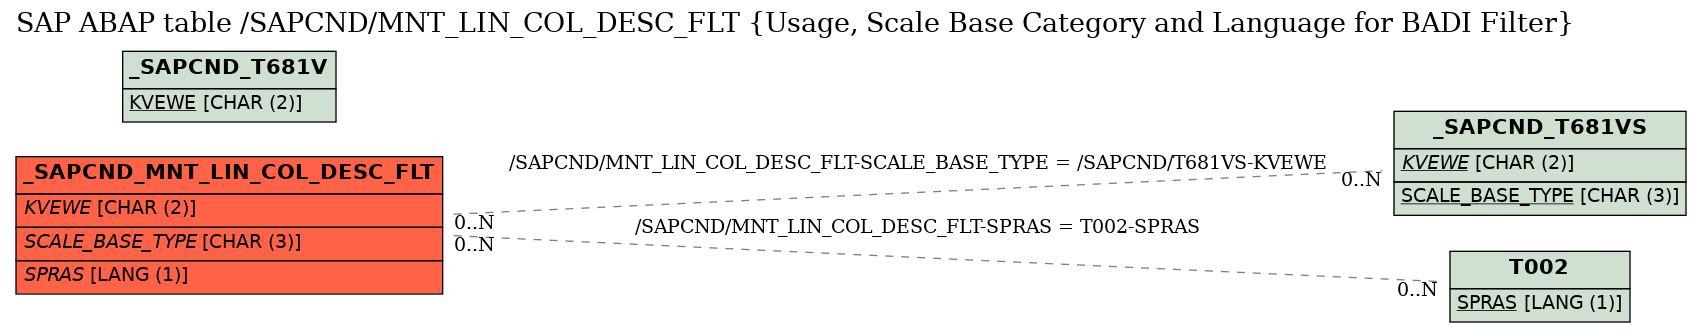 E-R Diagram for table /SAPCND/MNT_LIN_COL_DESC_FLT (Usage, Scale Base Category and Language for BADI Filter)